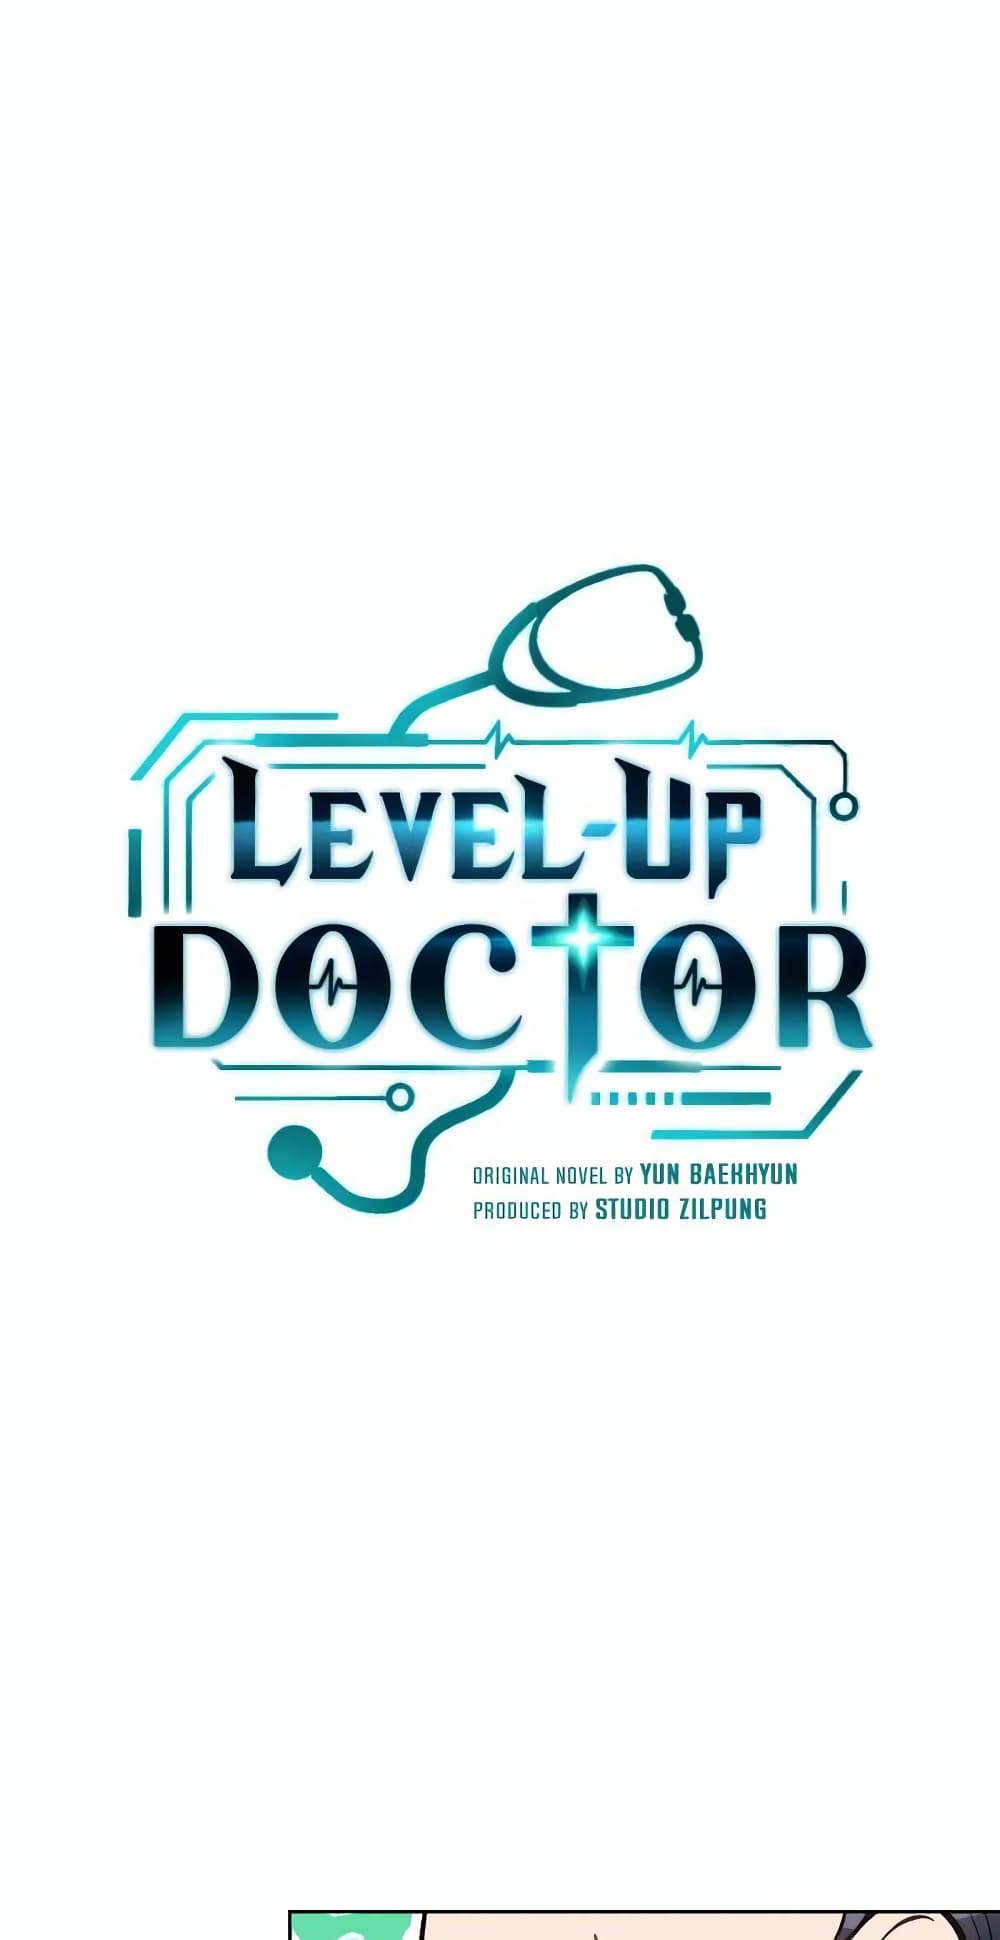 Level Up Doctor 25 (12)